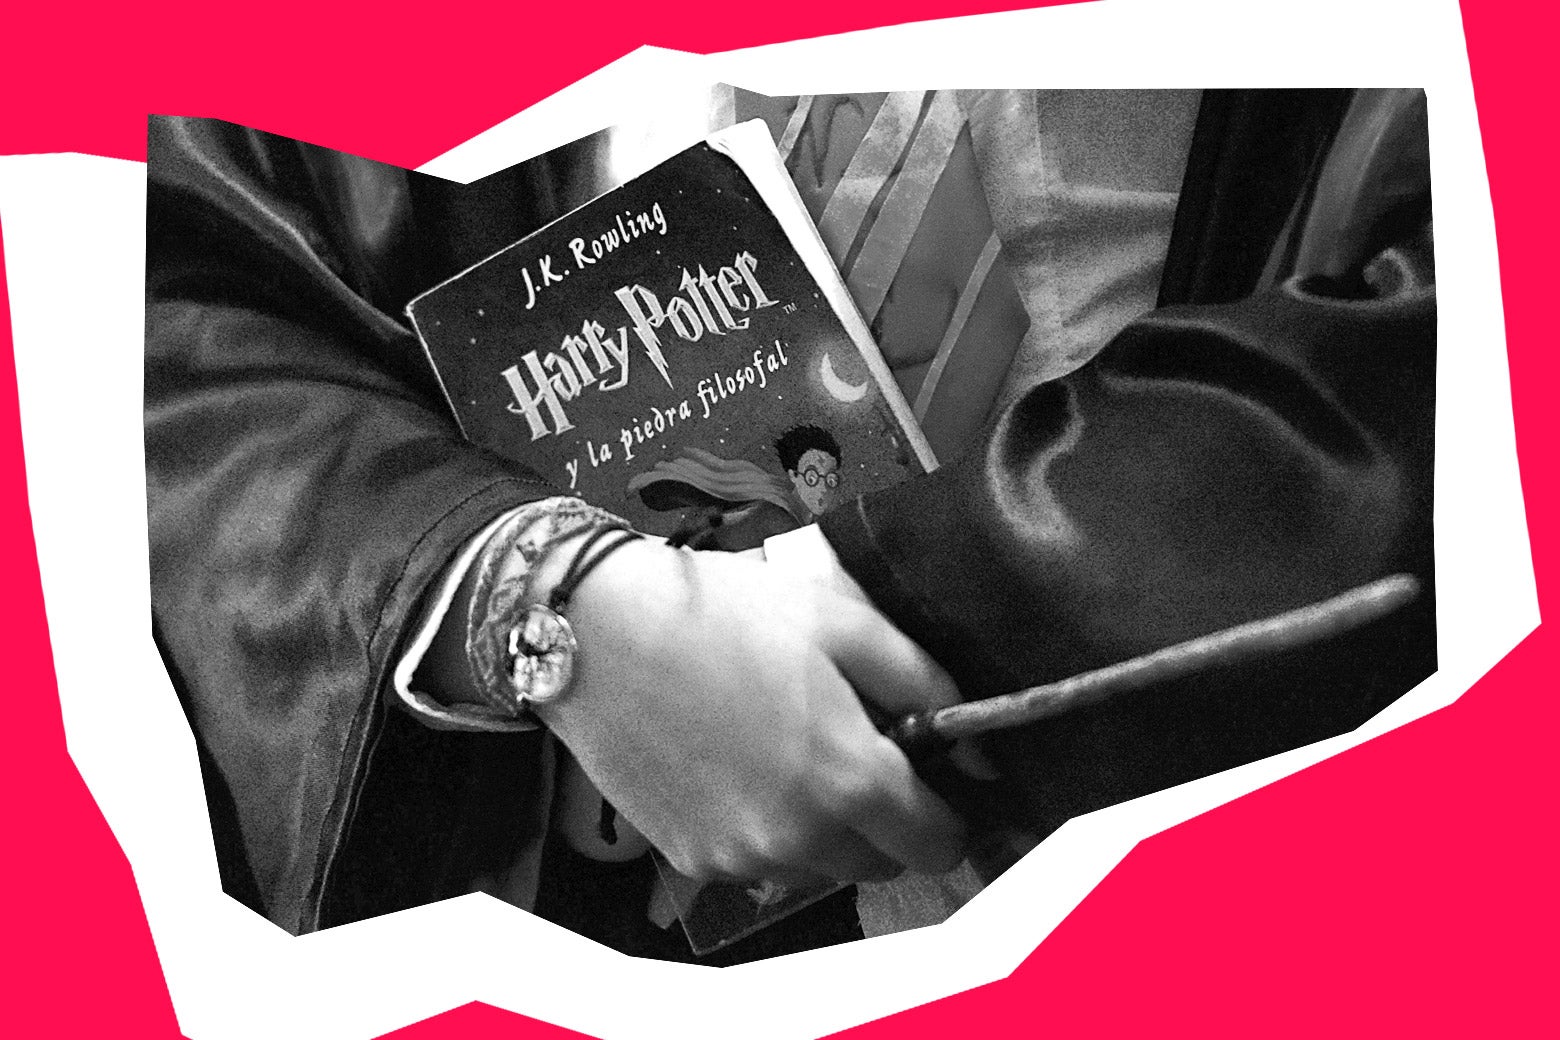 A boy clasping a Harry Potter book and a magic wand to his chest